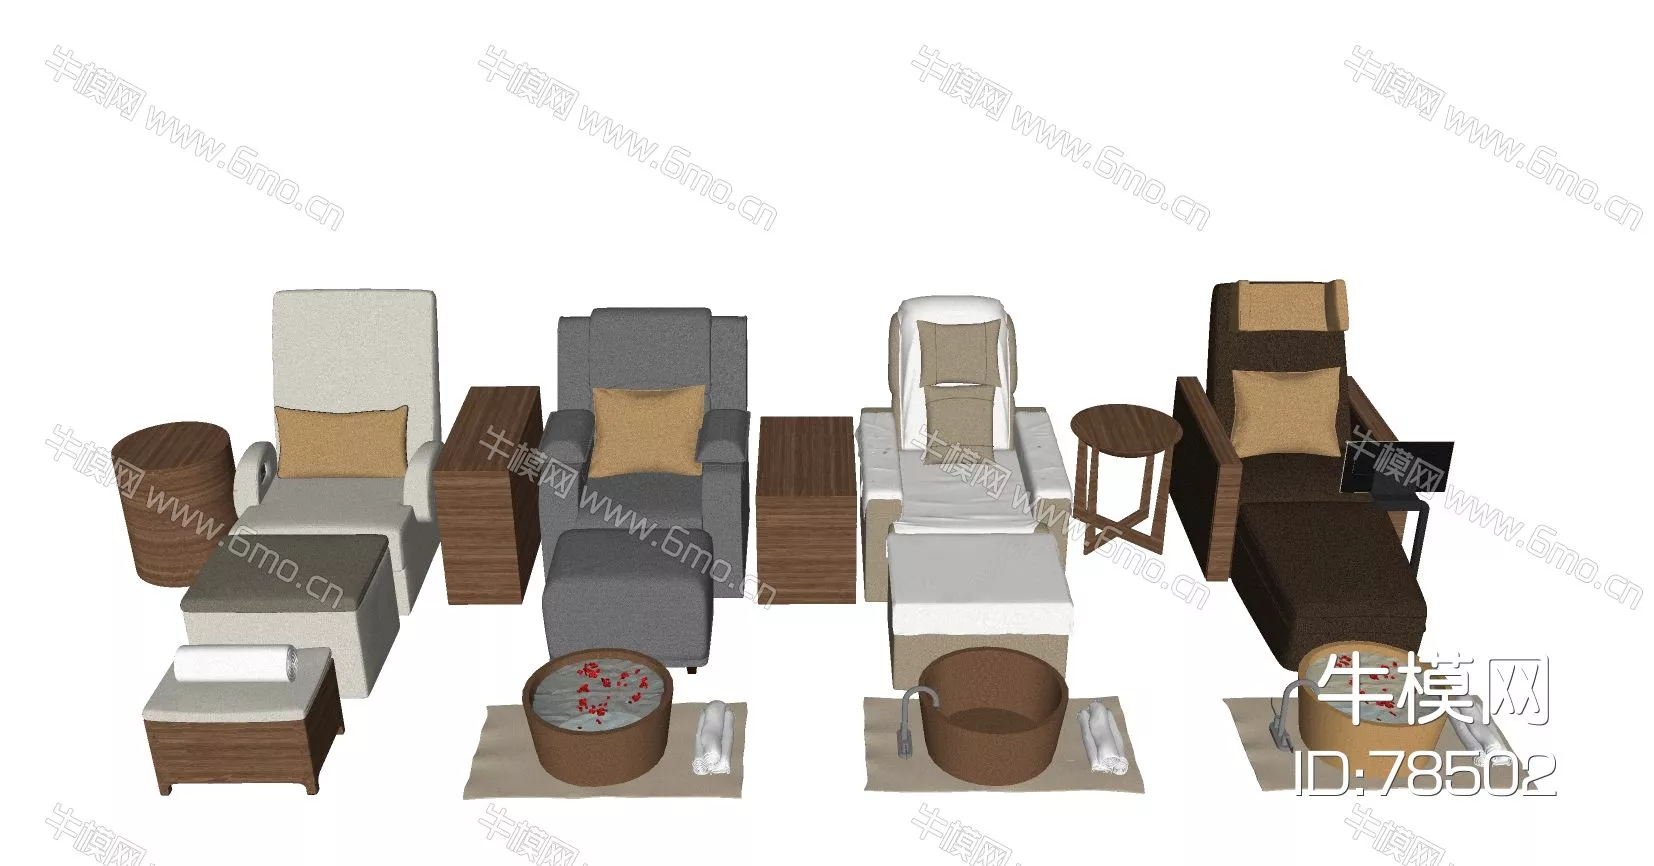 CHINESE OFFICE CHAIR - SKETCHUP 3D MODEL - ENSCAPE - 78502